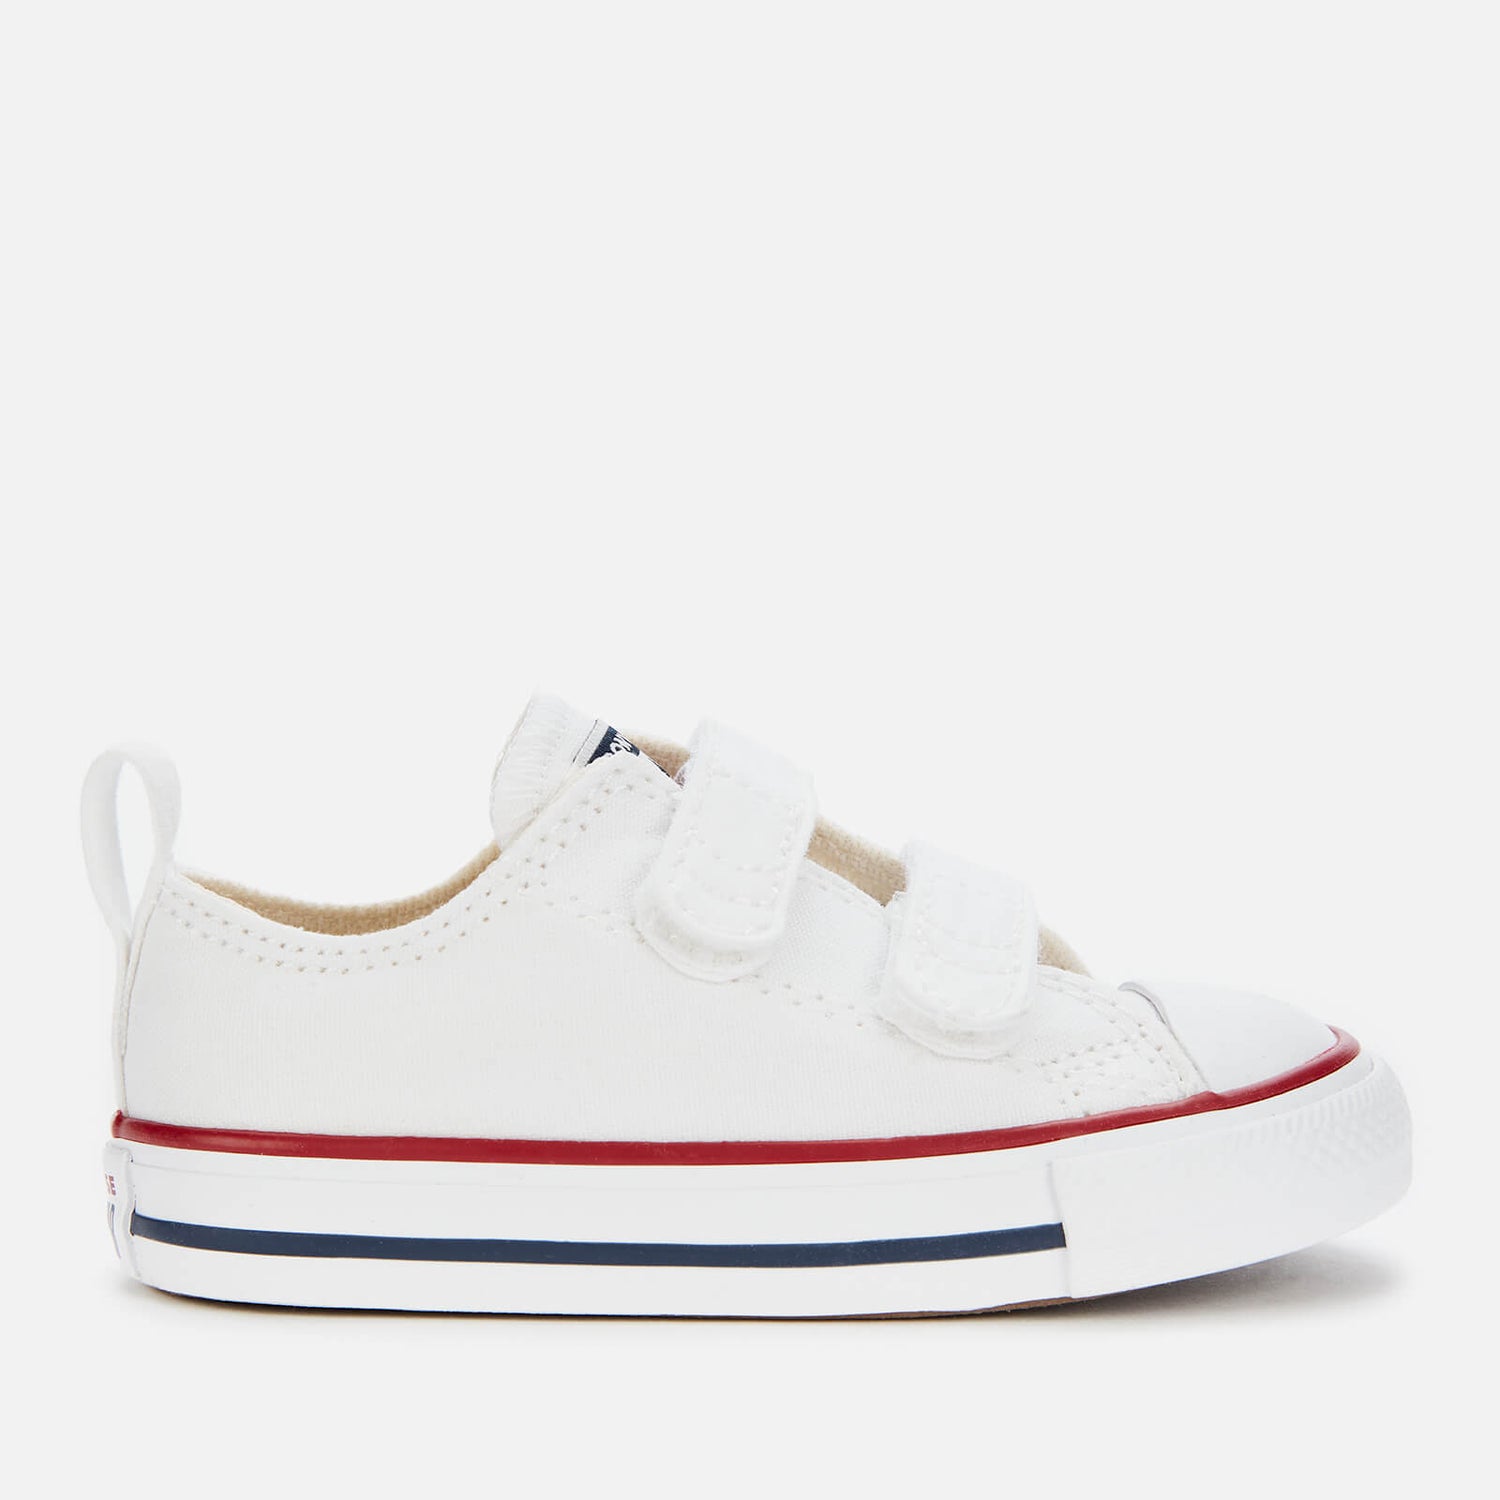 Converse Toddlers' Chuck Taylor All Star Ox Velcro Trainers - White - UK 4 Baby